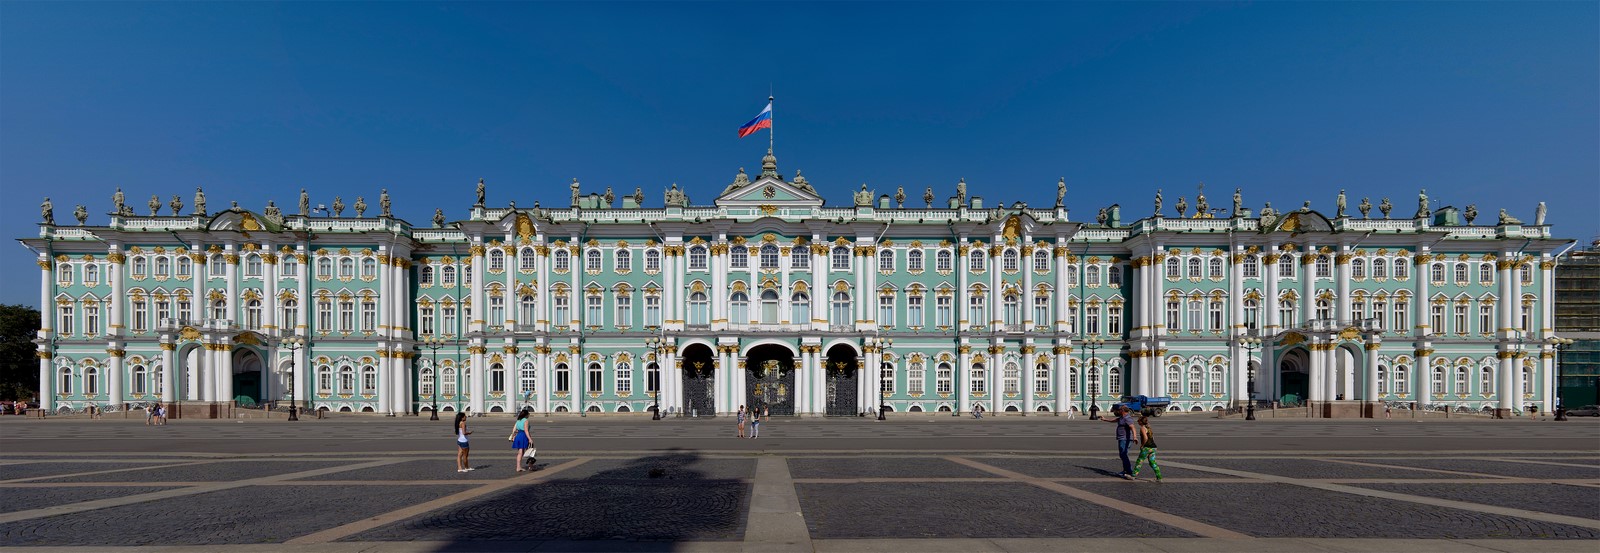 Winter Palace from the Palace Square ©Alex 'Florstein' Fedorov